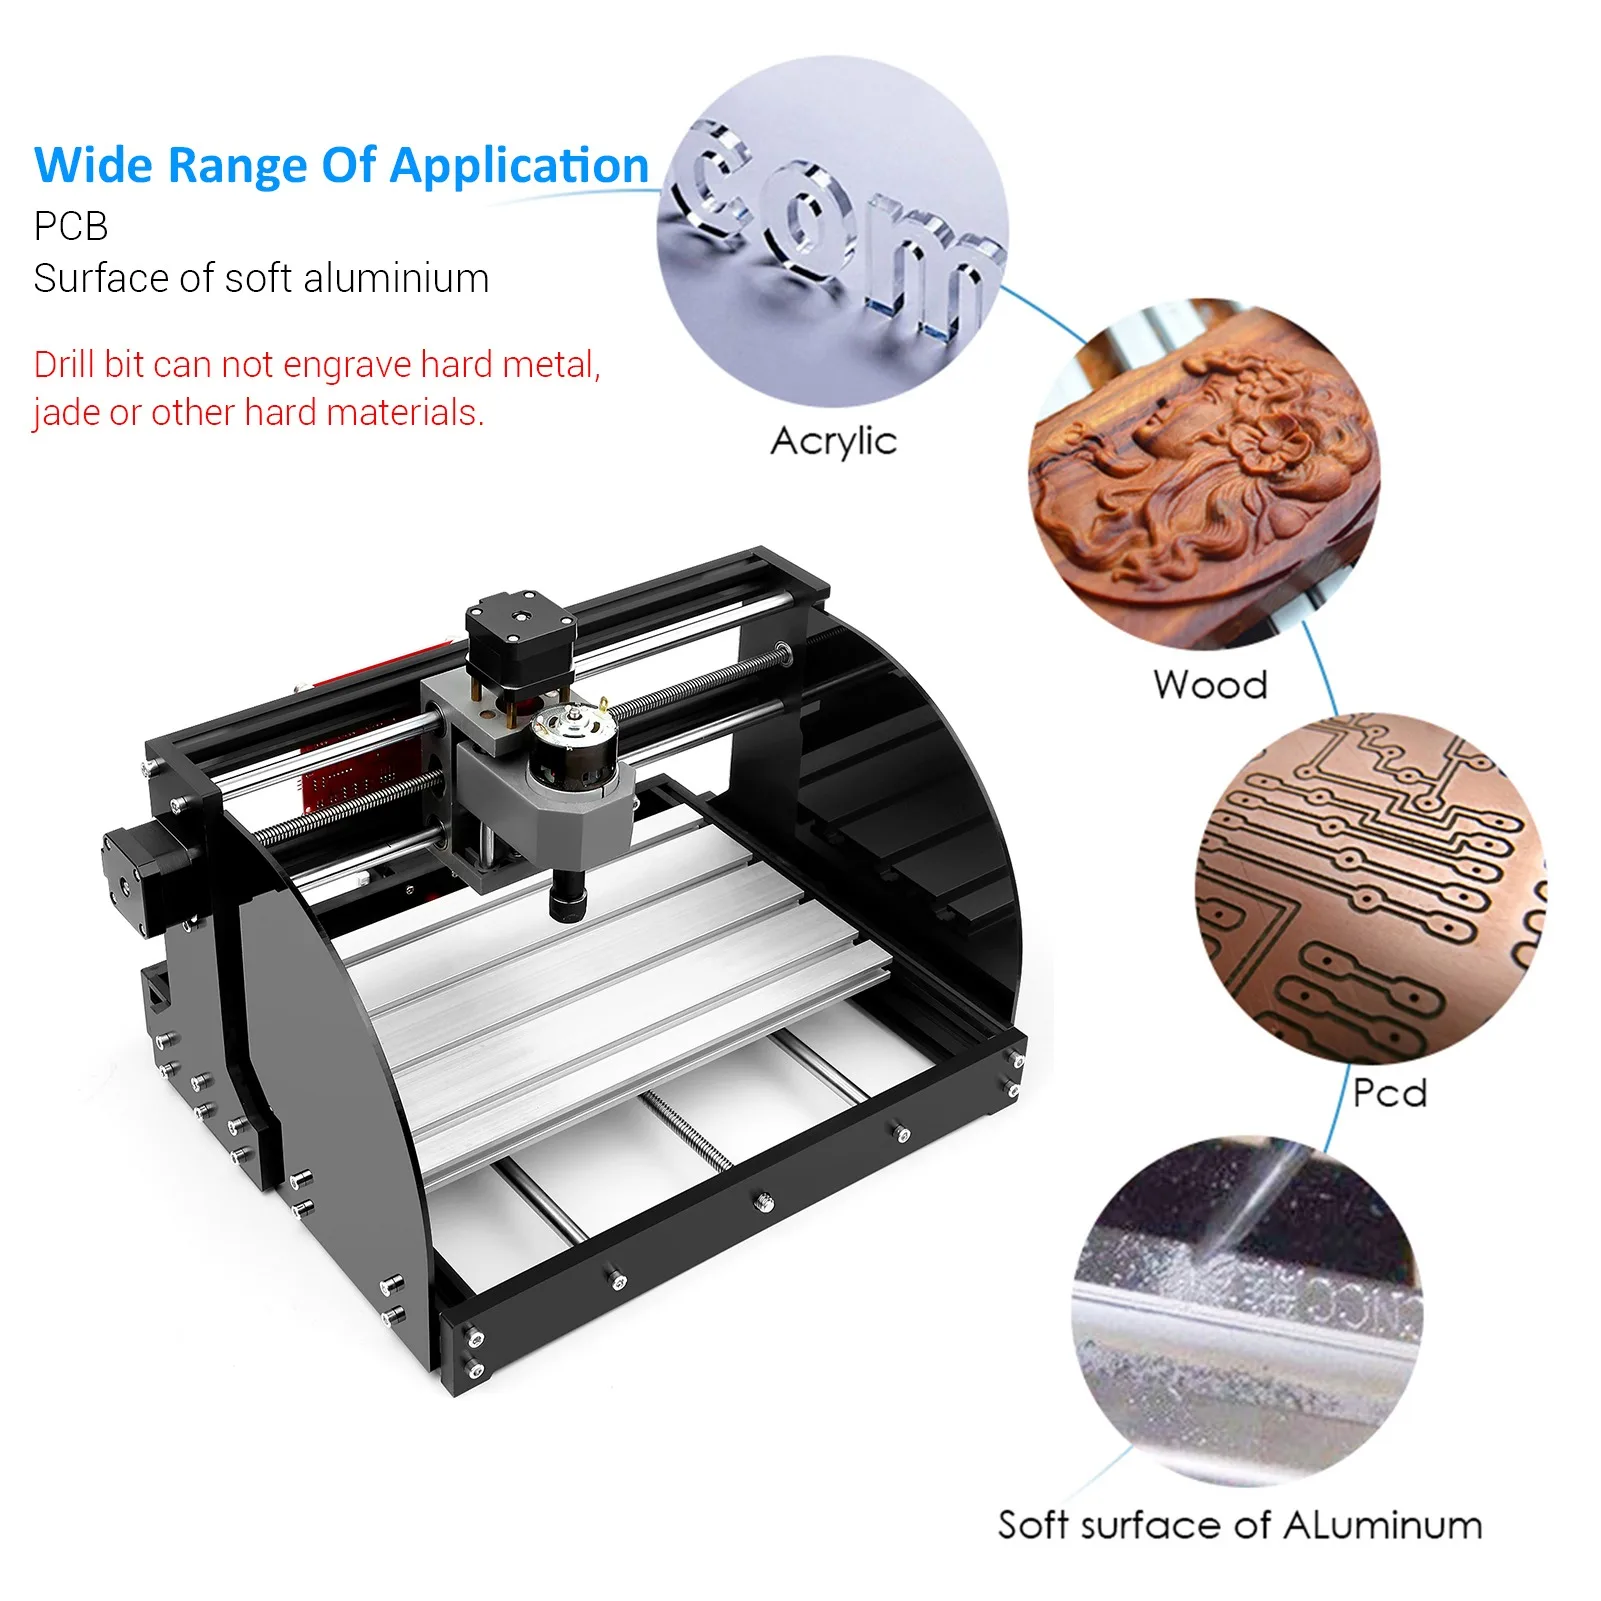 5500mW Upgrade Version CNC 3018Pro GRBL Control DIY Mini CNC Machine 3 Axis Pcb Milling Machine Wood Router Engraver Woodworking enlarge